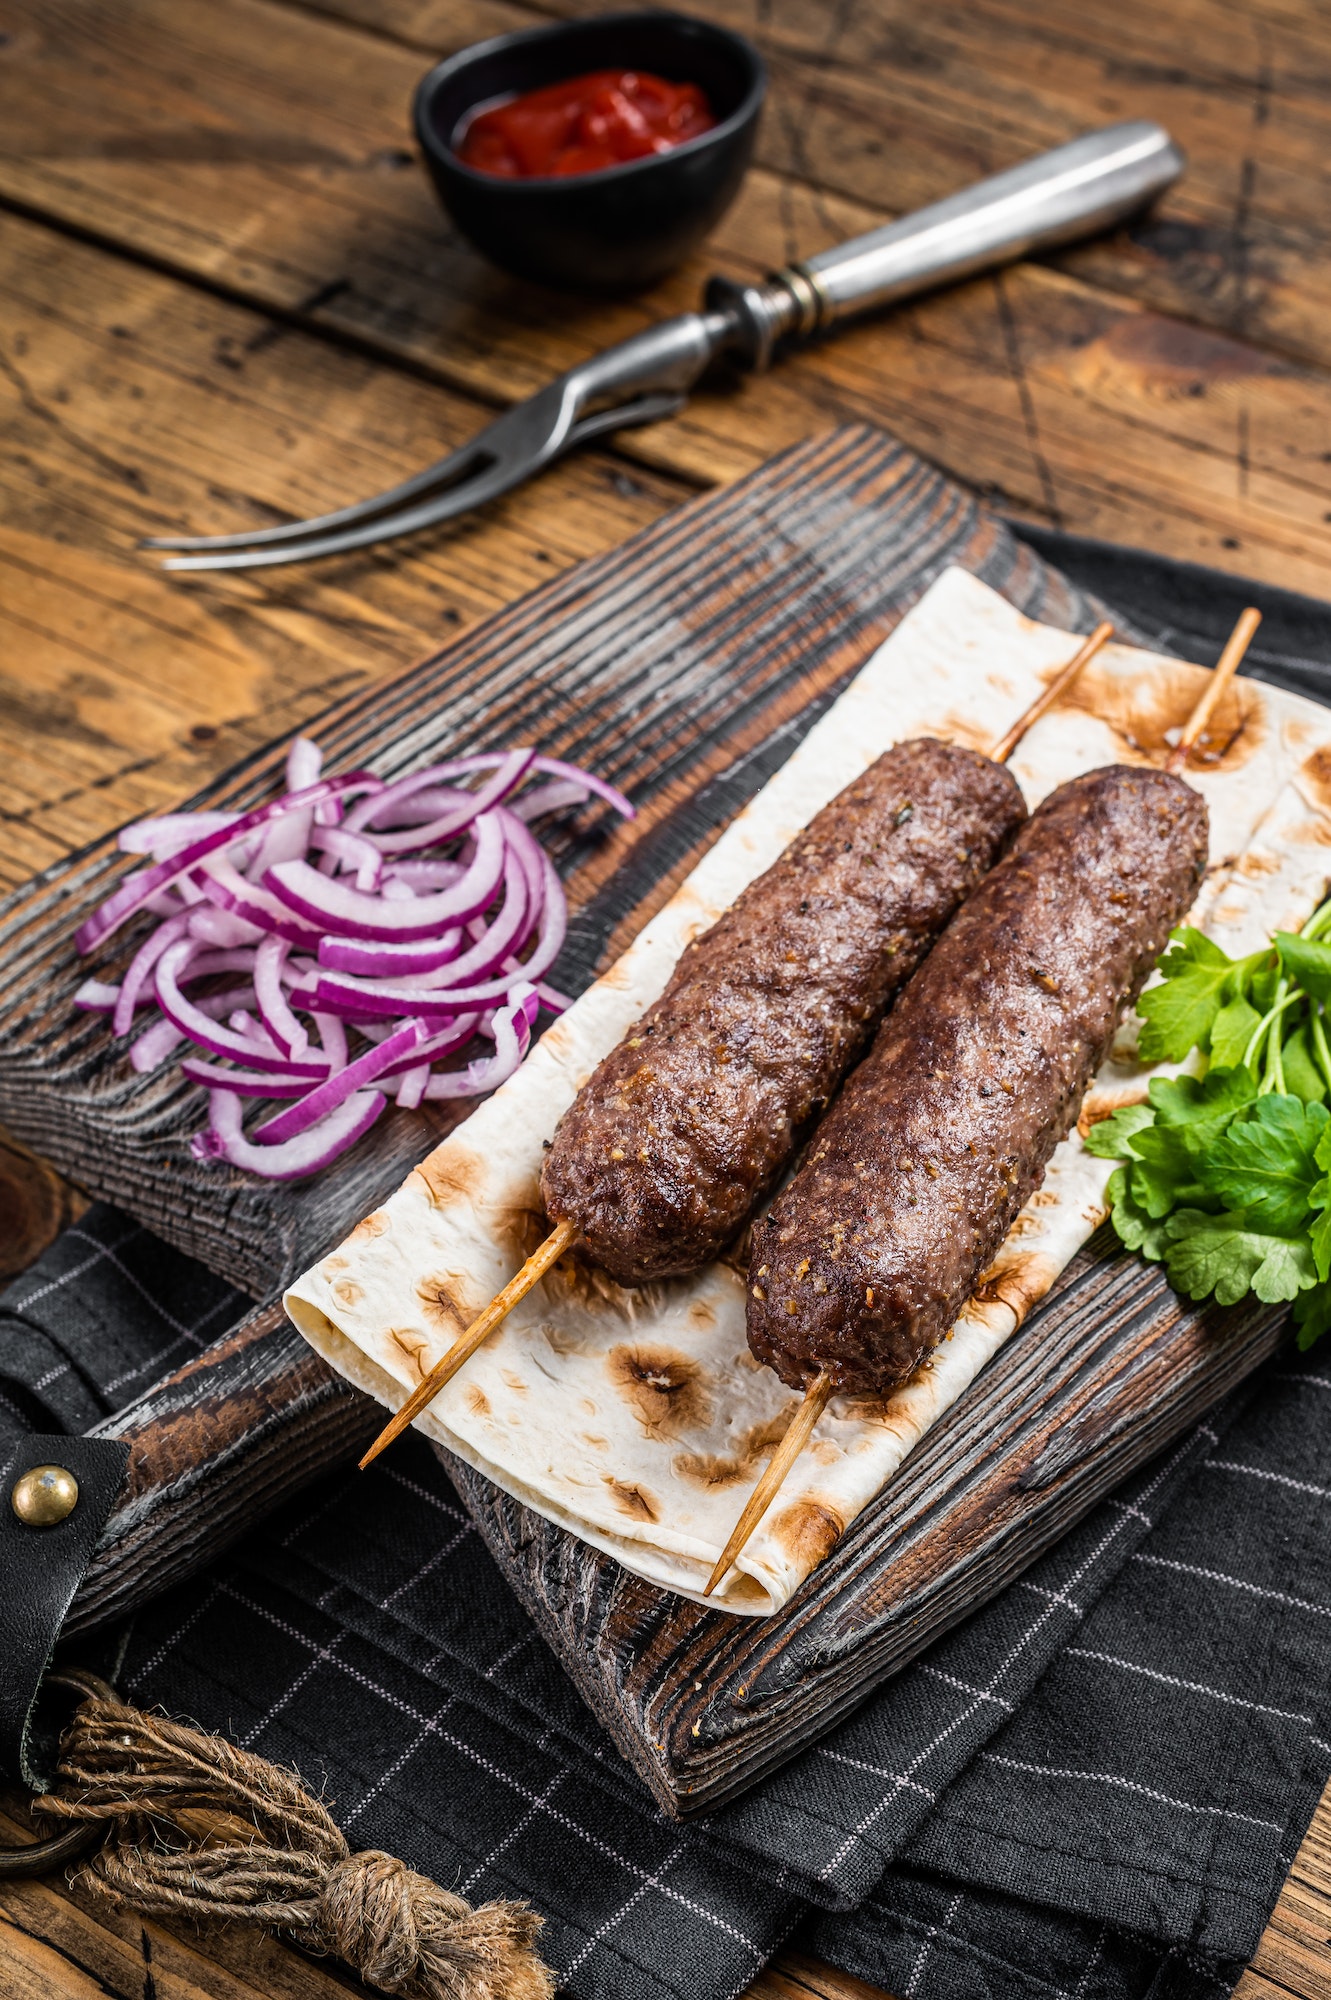 Traditional middle east kefta, kofta kebab from ground beef and lamb meat grilled on skewers served